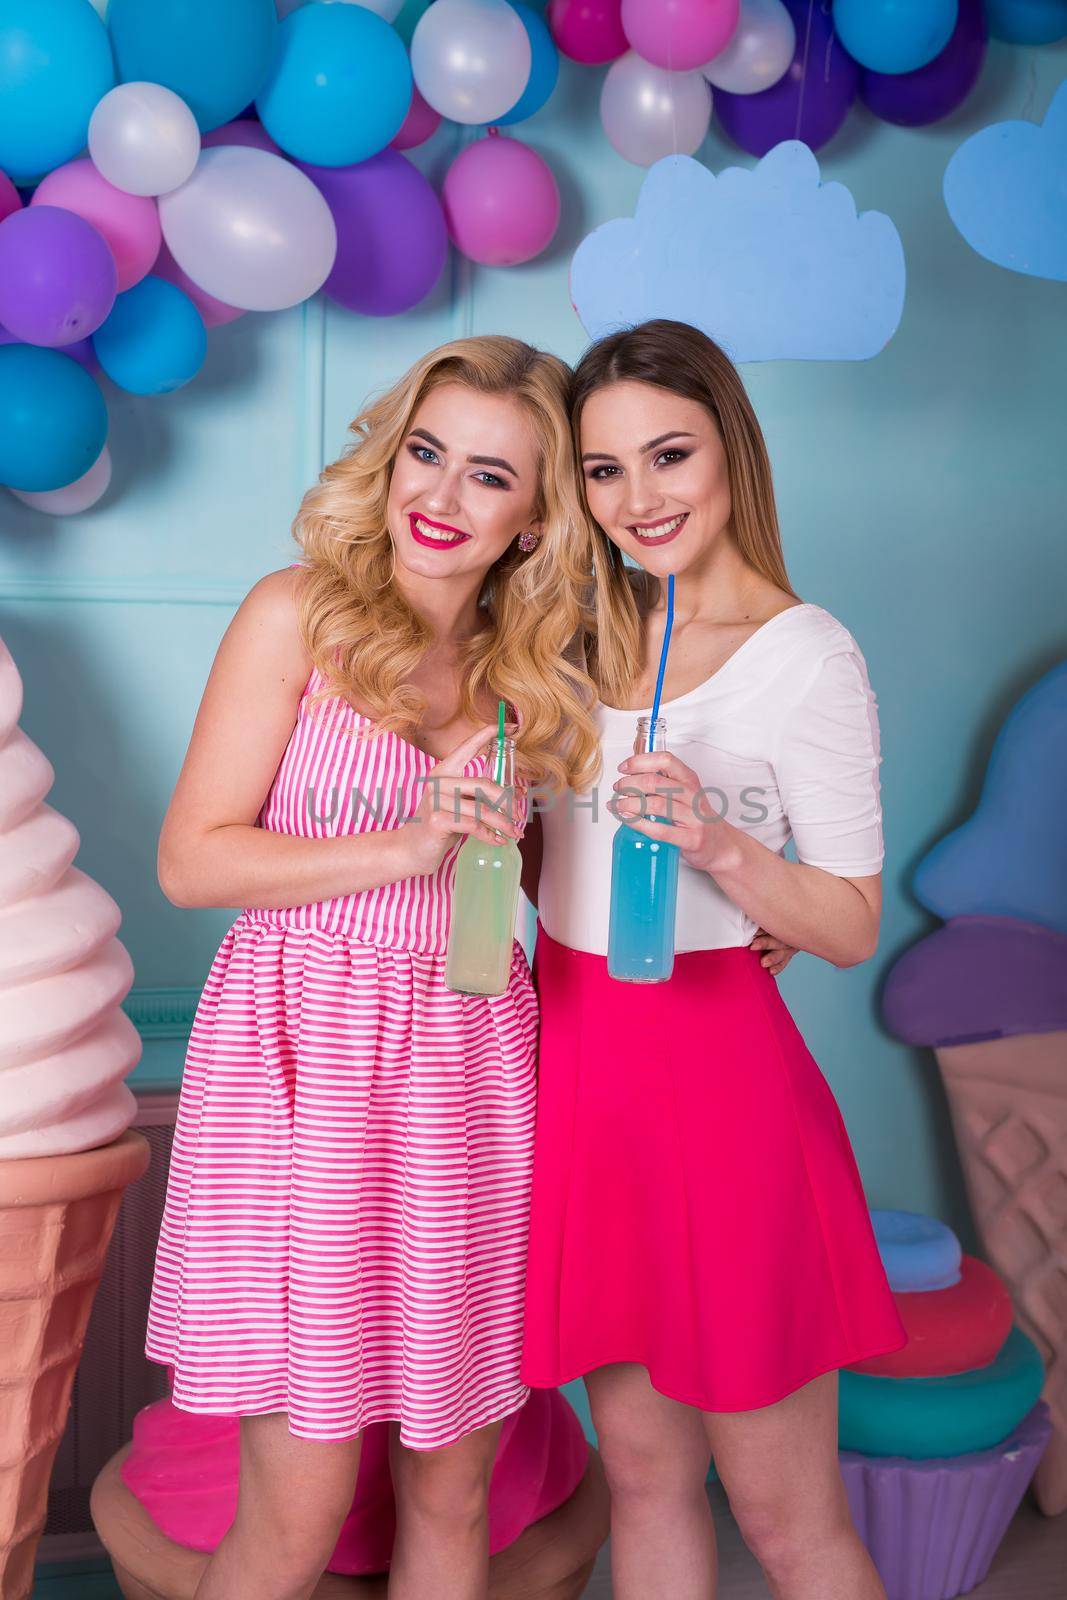 Two young women in pink dresses drink juice in a glass bottle.